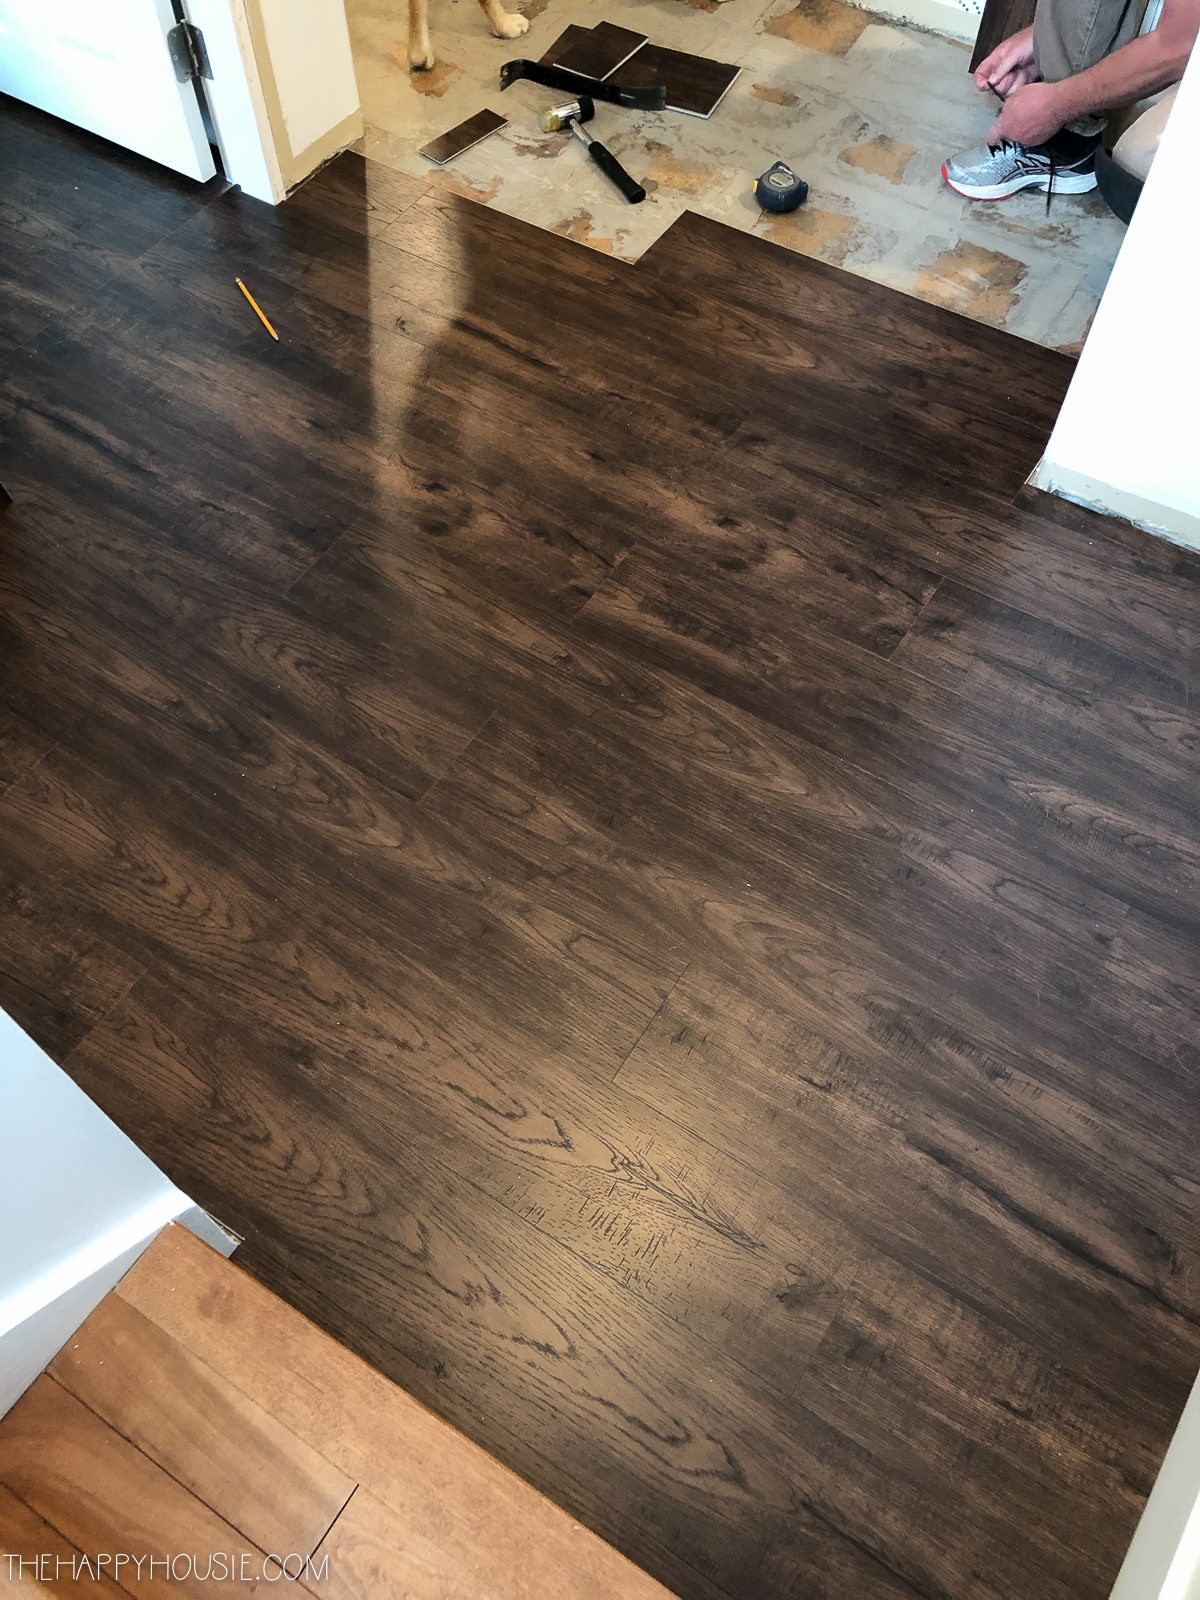 To Install Vinyl Plank Over Tile Floors, What Type Of Flooring Can You Put Over Ceramic Tile